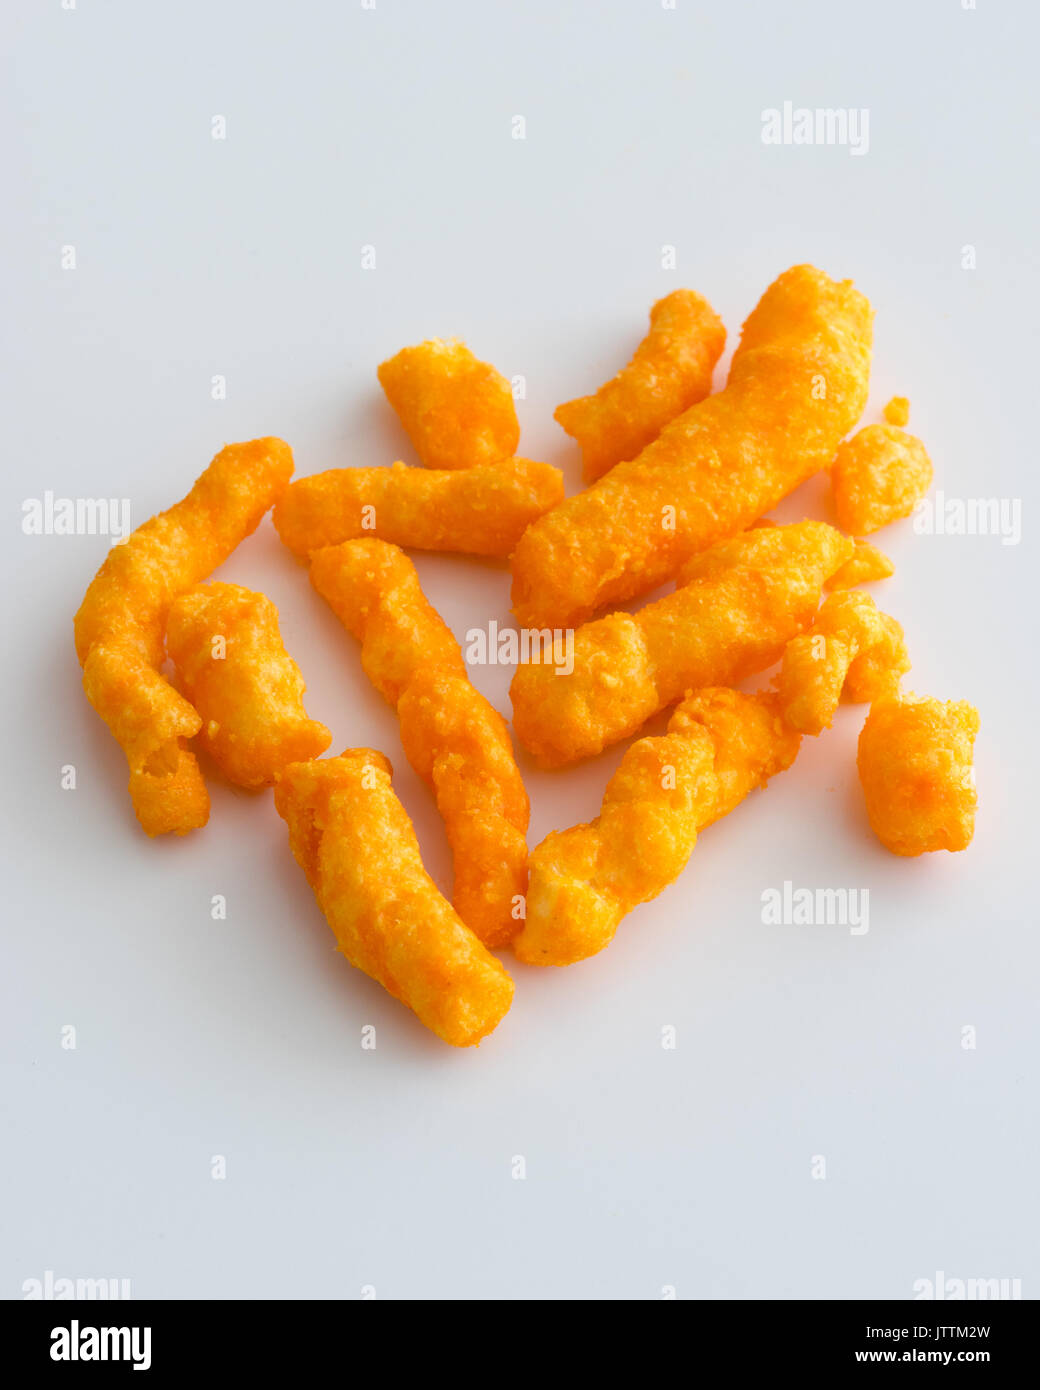 Cheezies, a brand of cheese puffs snack food made and sold in Canada by W.T. Hawkins Ltd. Stock Photo